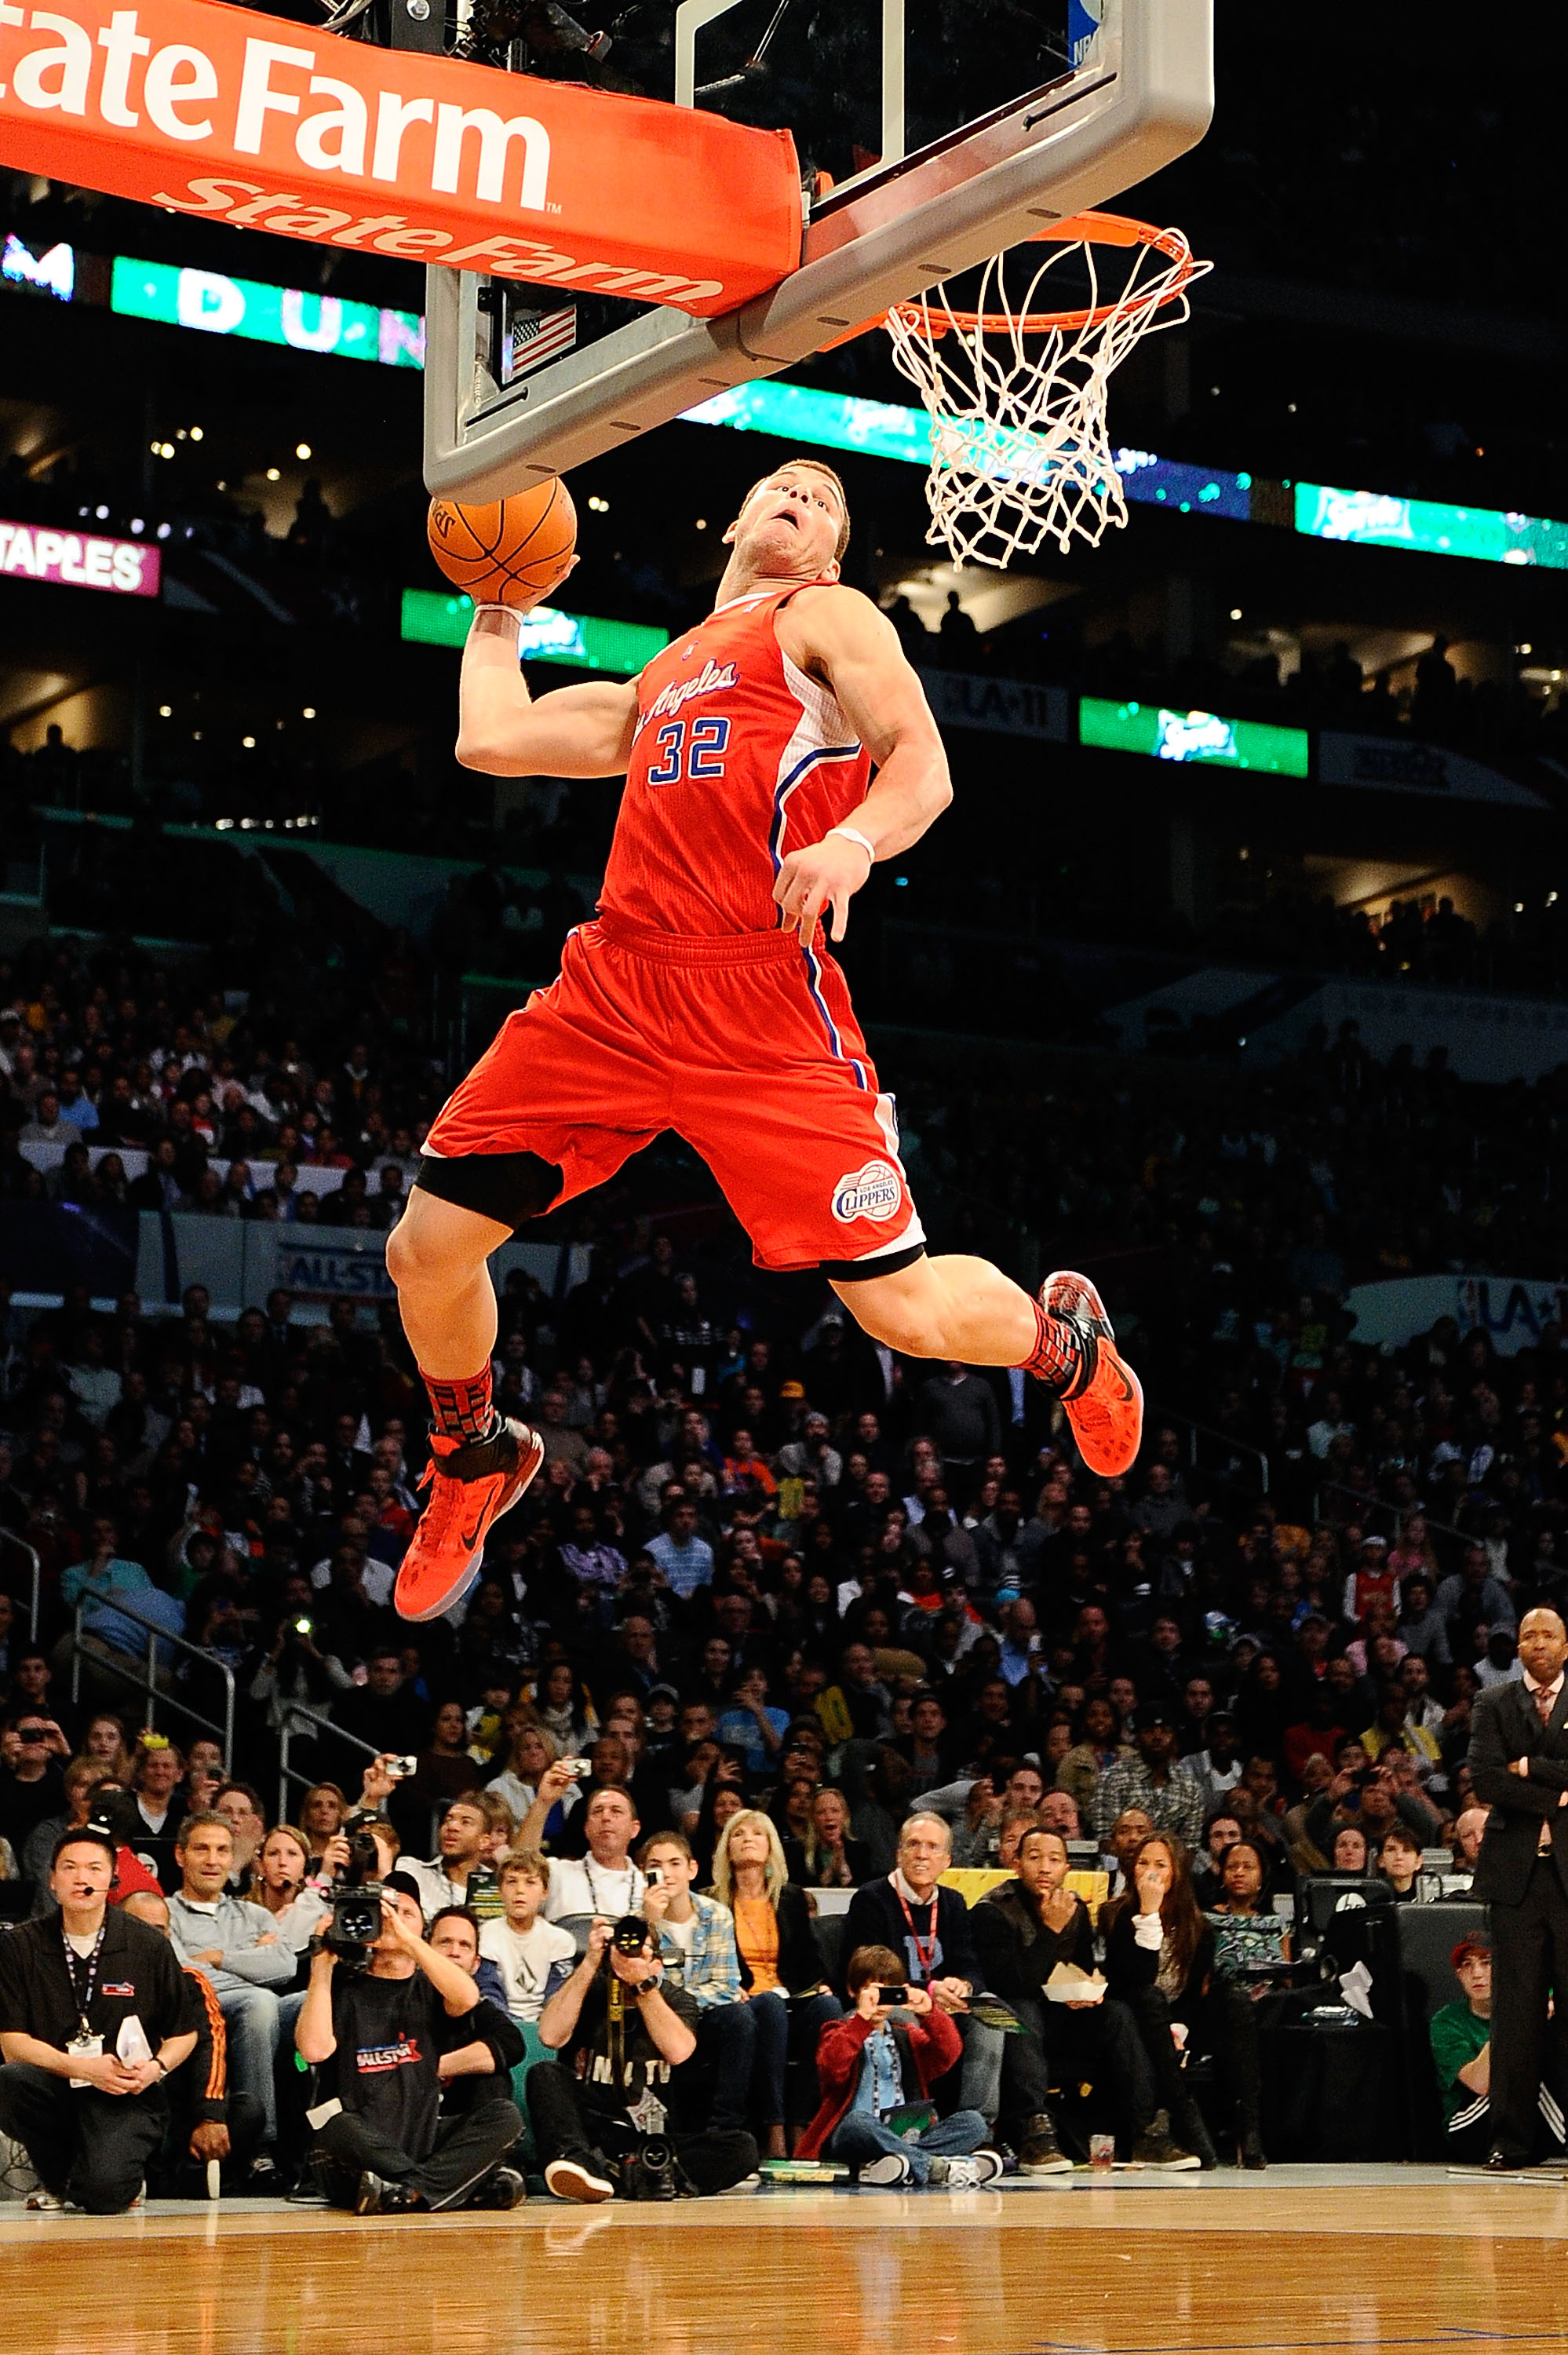 2011 NBA Slam Dunk Contest: Power Ranking All 12 Dunks (With Video